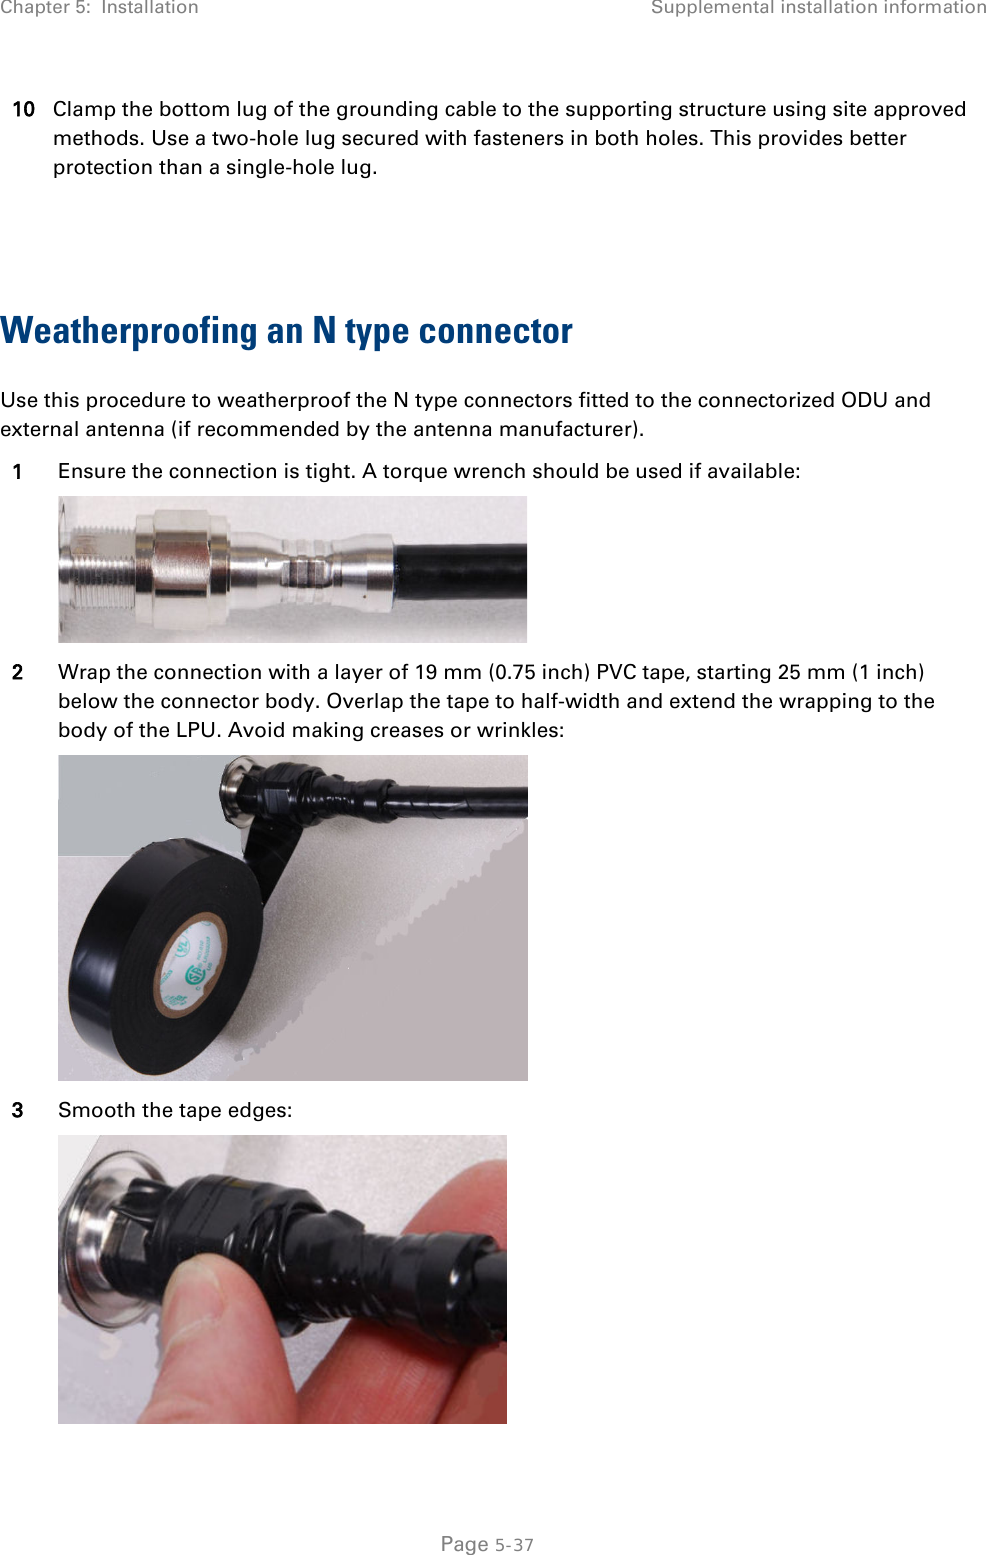 Chapter 5:  Installation Supplemental installation information  10 Clamp the bottom lug of the grounding cable to the supporting structure using site approved methods. Use a two-hole lug secured with fasteners in both holes. This provides better protection than a single-hole lug.   Weatherproofing an N type connector Use this procedure to weatherproof the N type connectors fitted to the connectorized ODU and external antenna (if recommended by the antenna manufacturer). 1 Ensure the connection is tight. A torque wrench should be used if available:  2 Wrap the connection with a layer of 19 mm (0.75 inch) PVC tape, starting 25 mm (1 inch) below the connector body. Overlap the tape to half-width and extend the wrapping to the body of the LPU. Avoid making creases or wrinkles:  3 Smooth the tape edges:   Page 5-37 